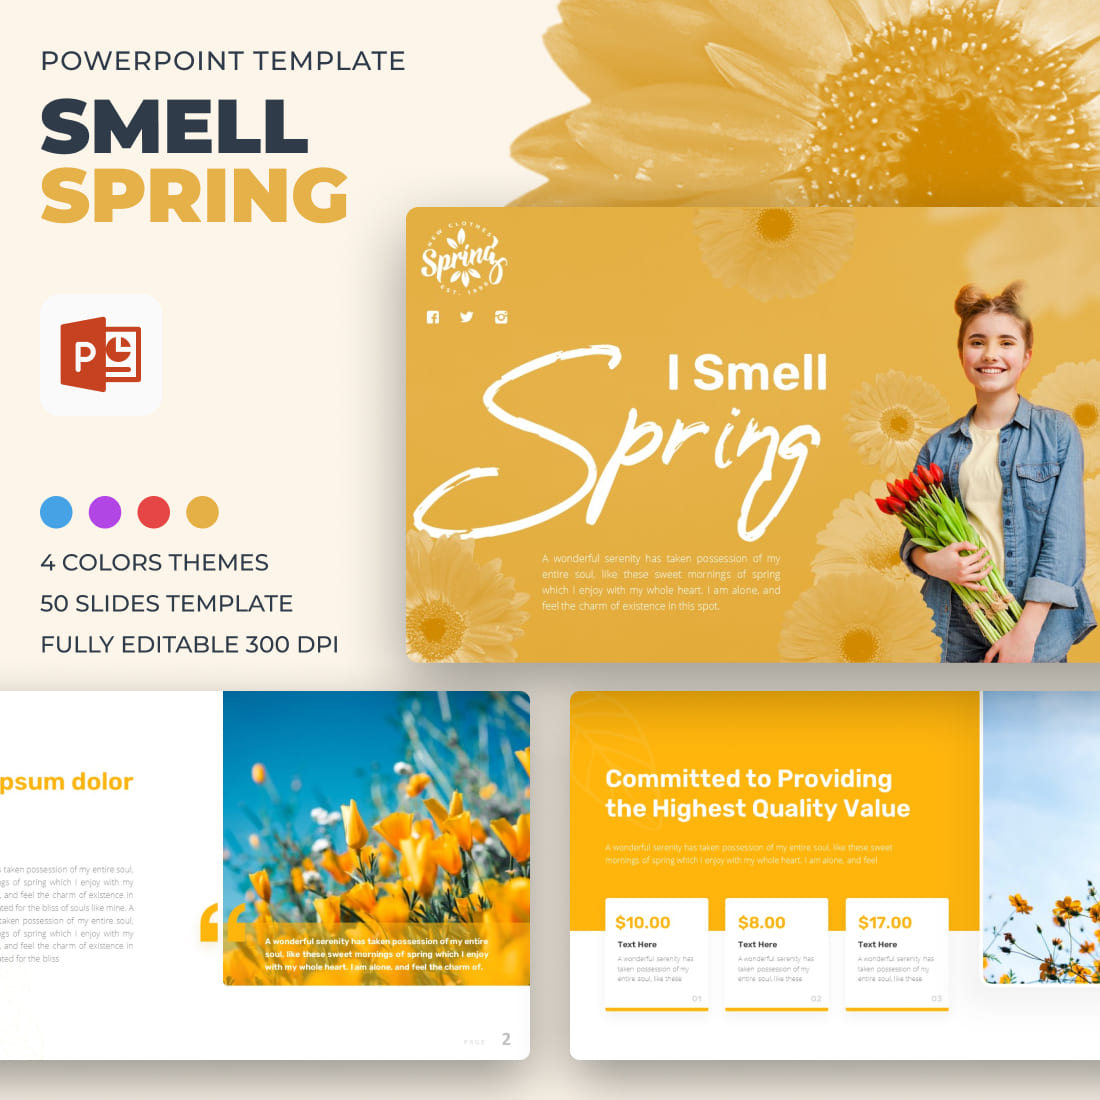 Collection of images of colorful presentation slides on the theme of spring.